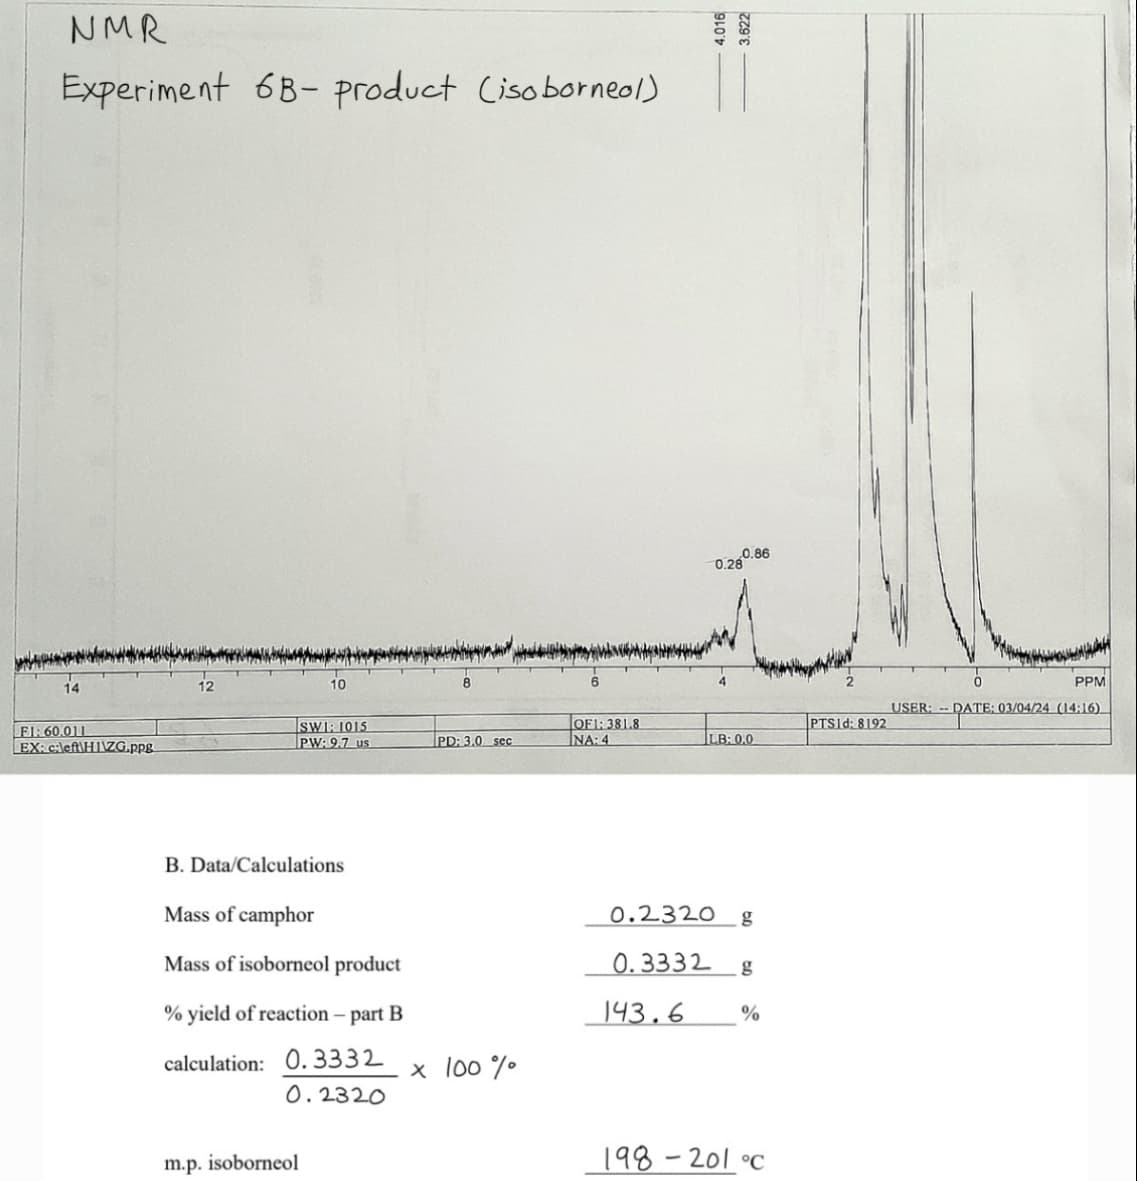 14
NMR
Experiment 6B-product (isoborneol)
10
0.28
20.86
4.016
3.622
FI: 60.011
SWI: 1015
EX: c:left\HIZG.ppg
PW:9.7 us
PD: 3.0 sec
OF1:381.8
NA:4
PTS1d: 8192
LB: 0.0
B. Data/Calculations
Mass of camphor
Mass of isoborneol product
% yield of reaction-part B
calculation: 0.3332
0.2320 g
0.3332 g
143.6
%
× 100%
0.2320
m.p. isoborneol
198-201 °c
PPM
USER: DATE: 03/04/24 (14:16)
DATE: